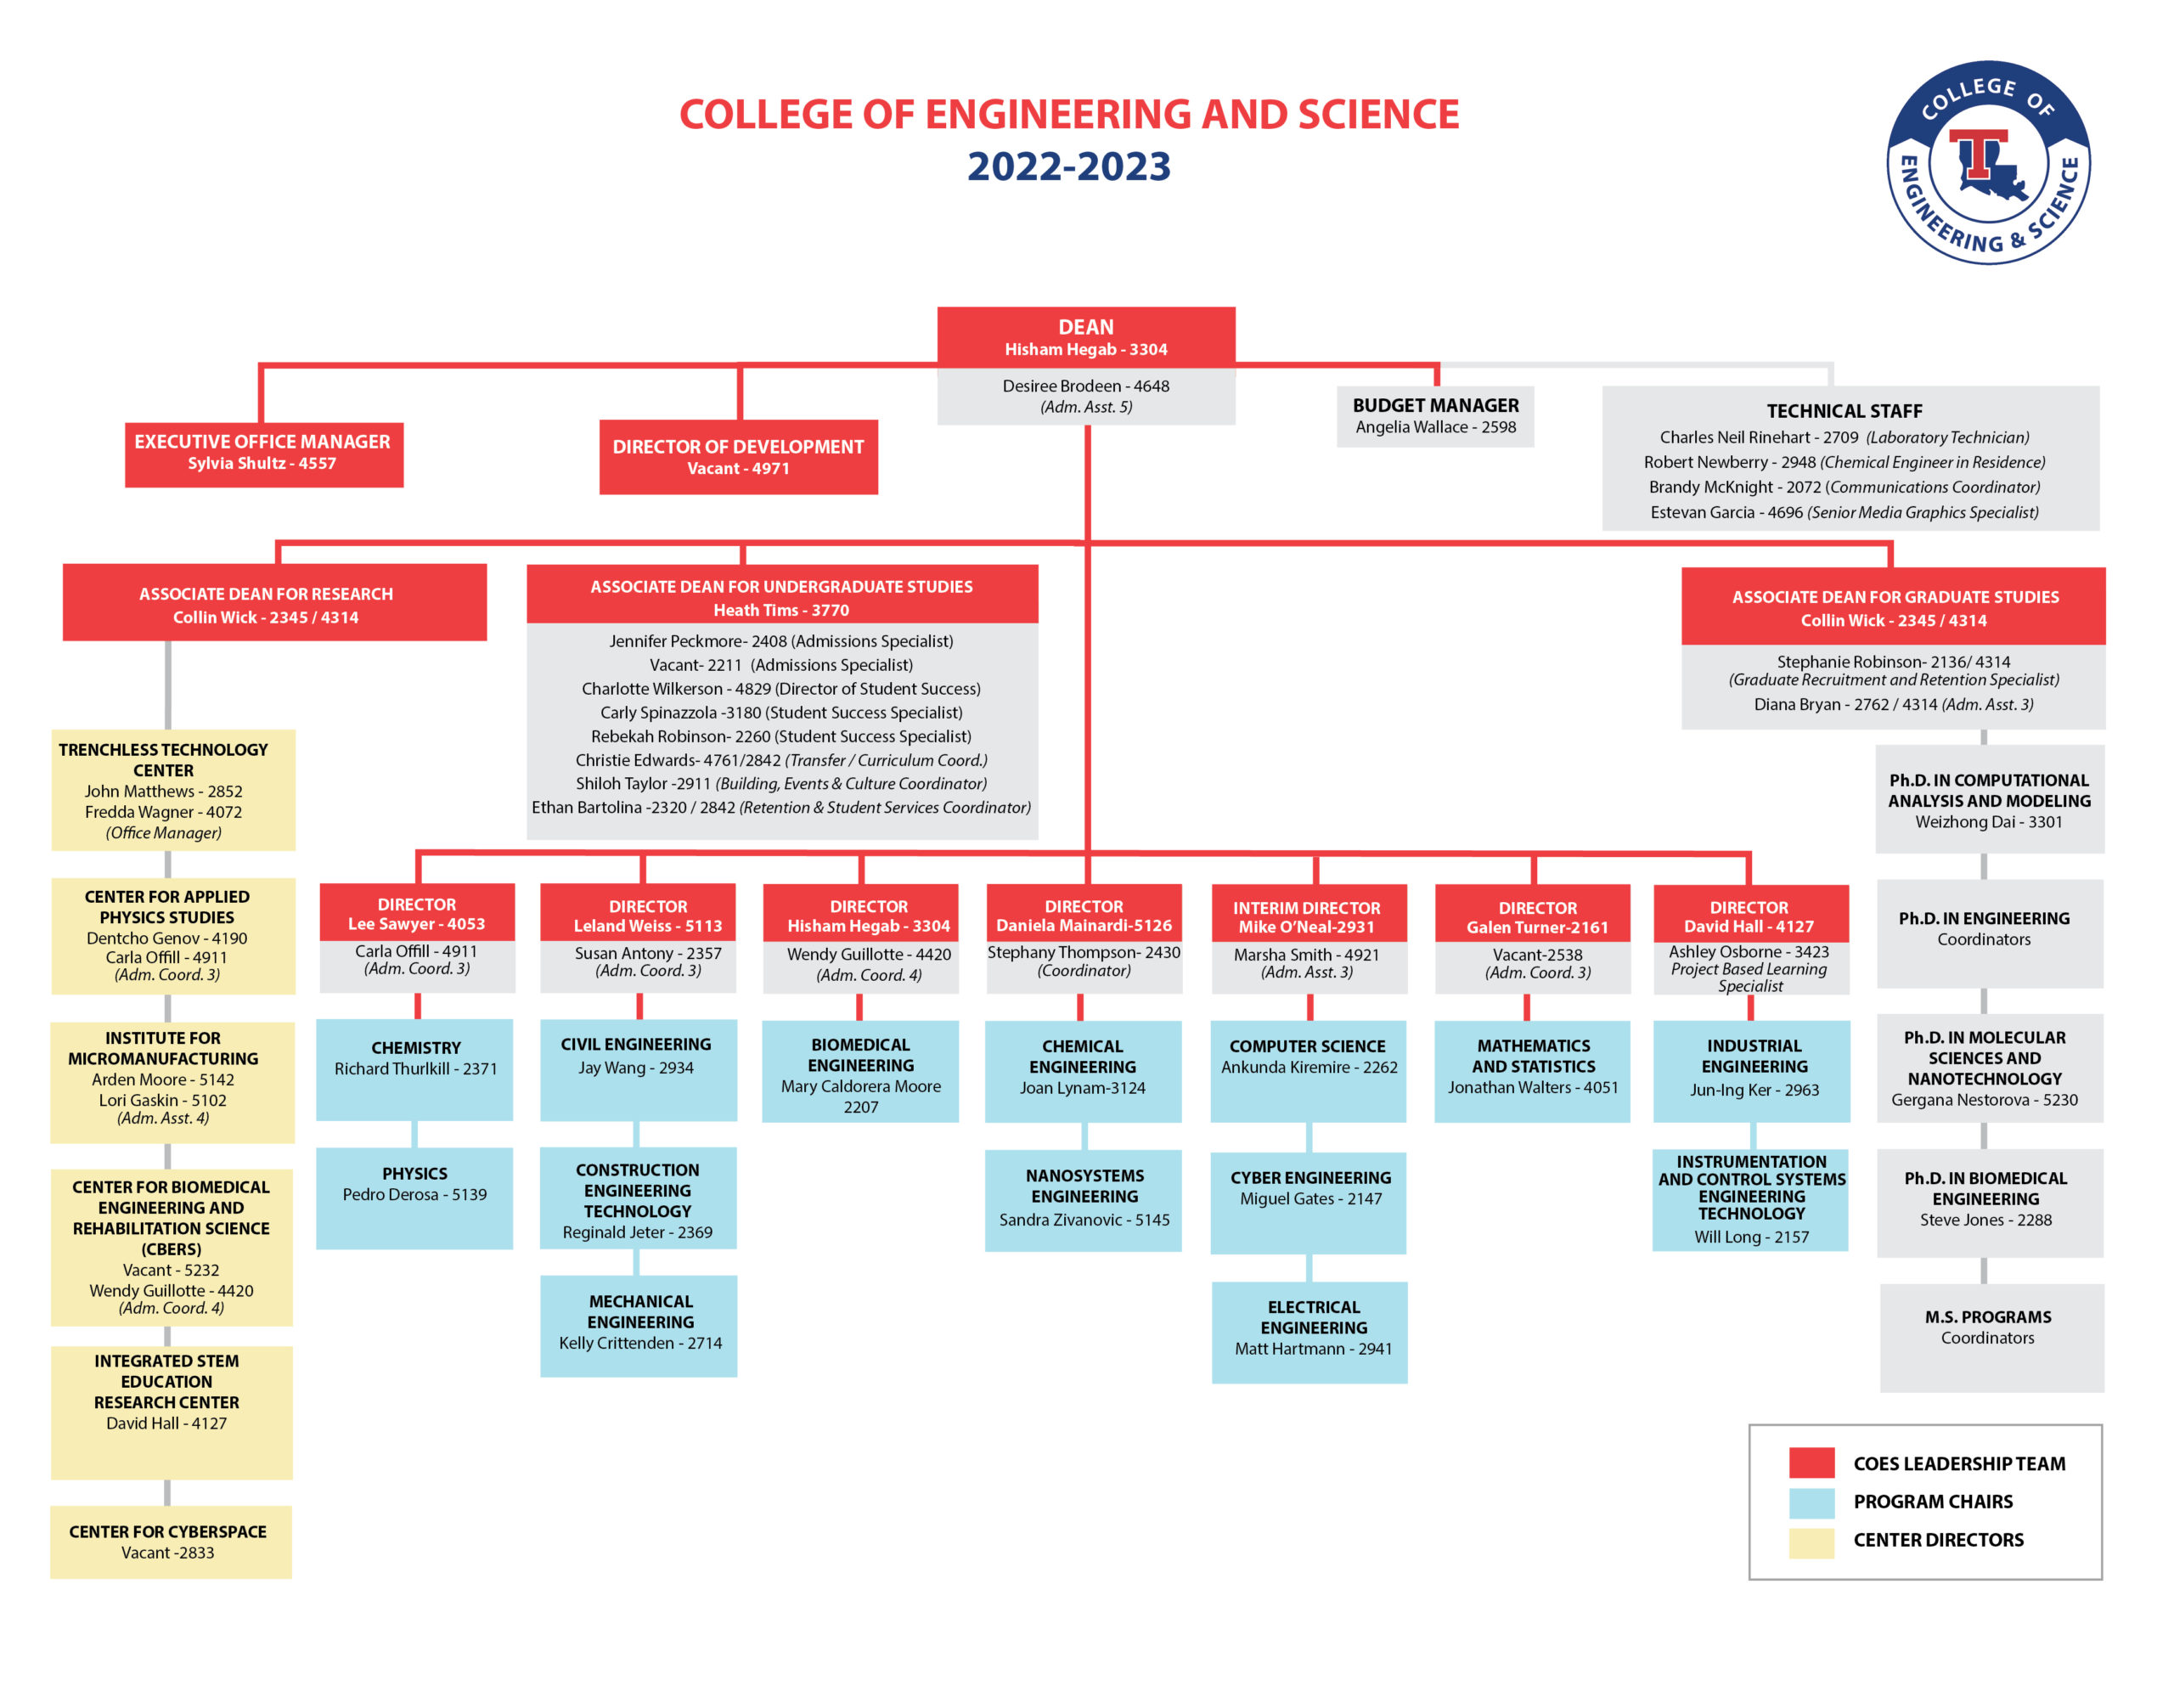 College of Engineering and Science 2022-2023